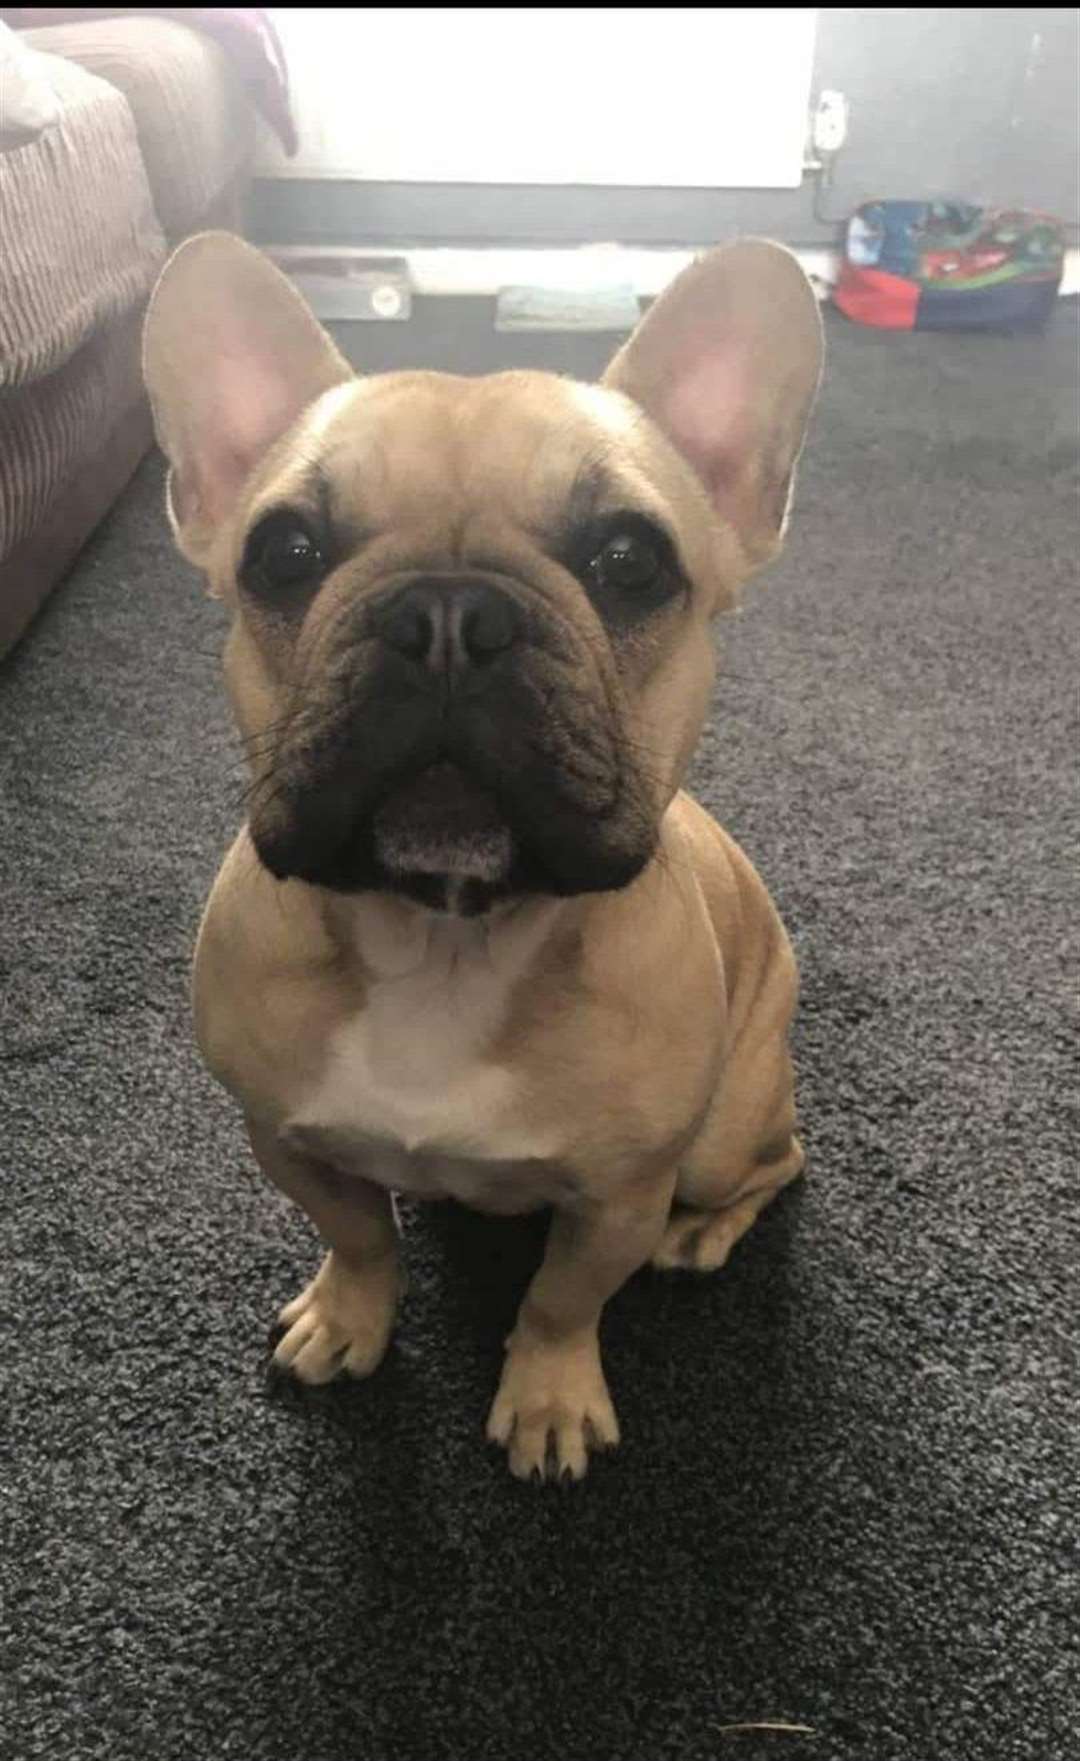 Minnie was reported missing back in March (RSPCA)